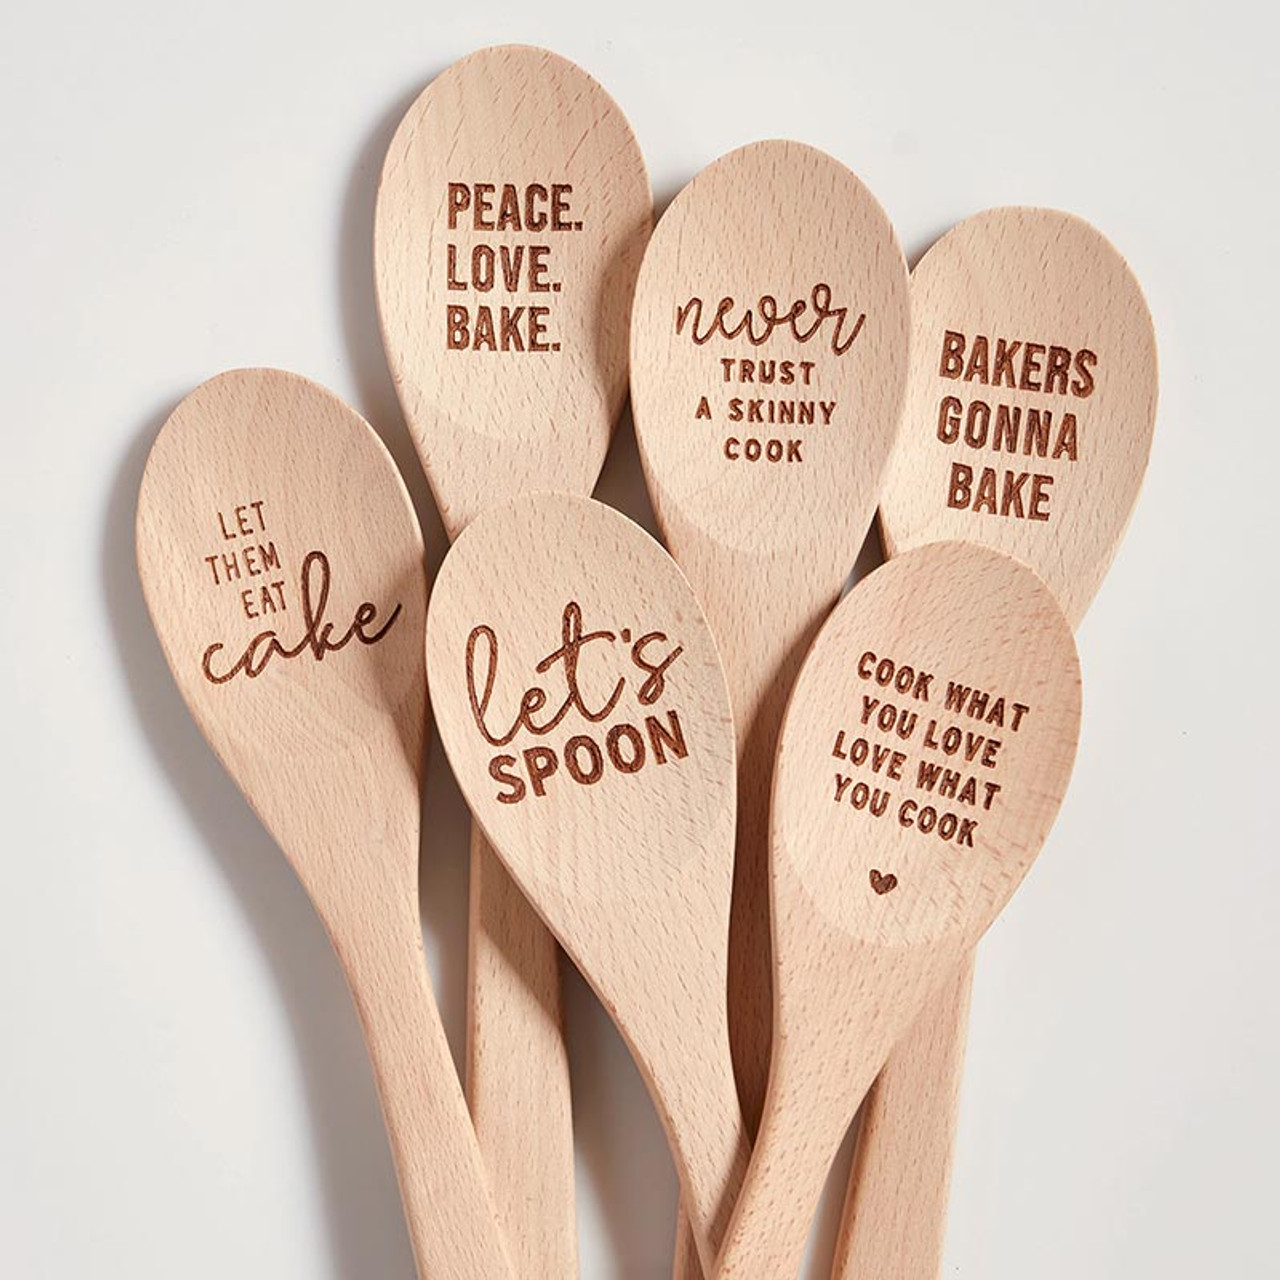 Wood Spoon - Cooking With Love Provides Food for the Soul